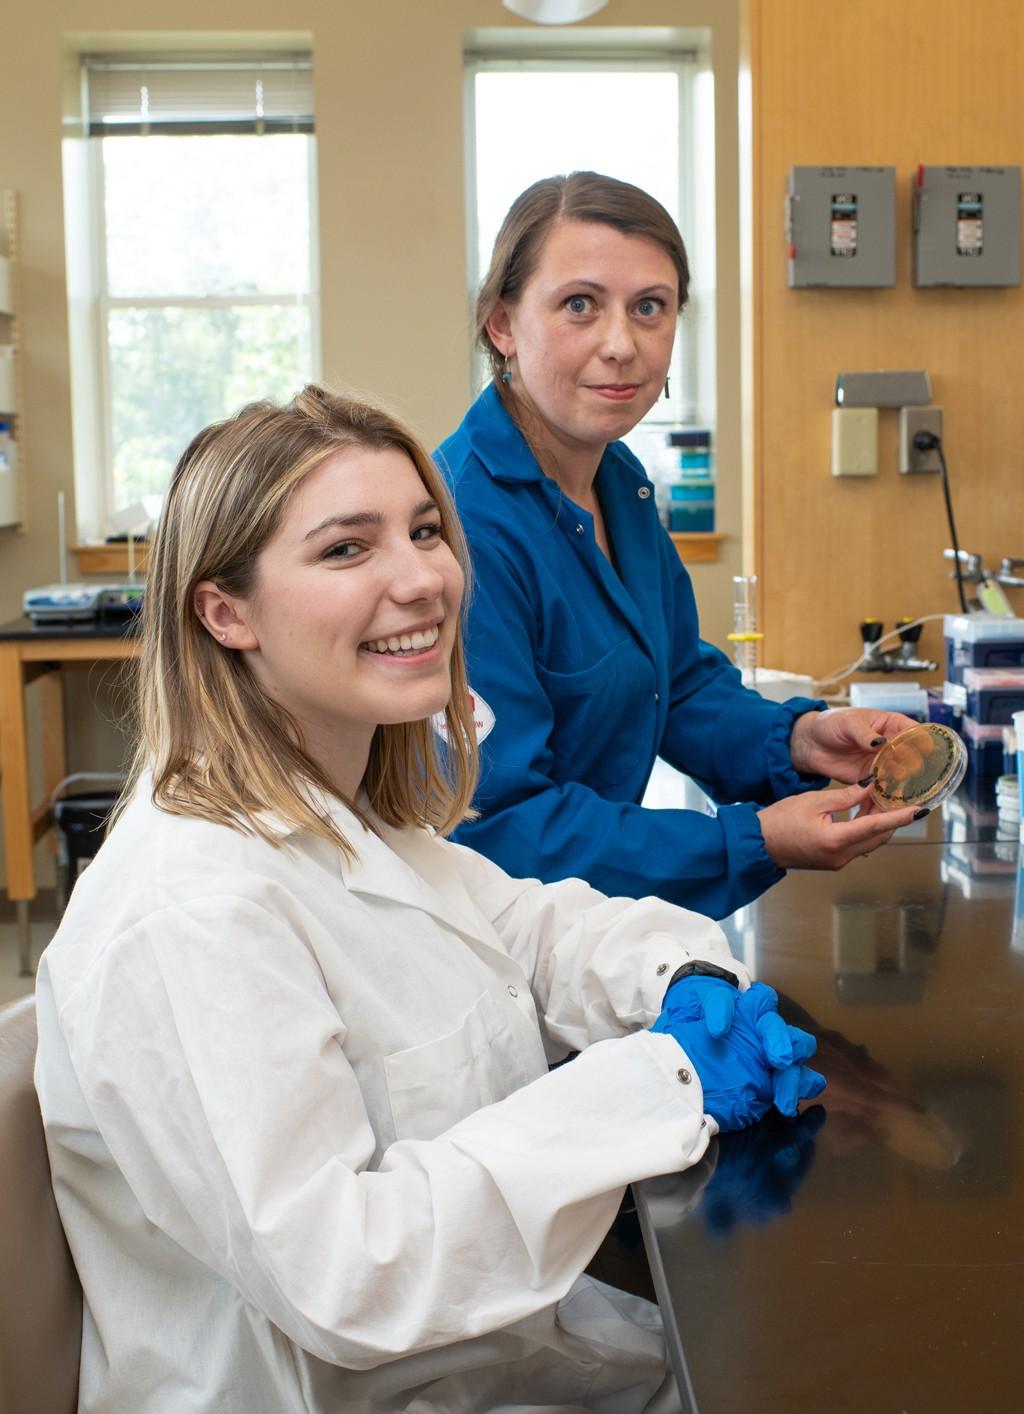 Professor Balog holds up an agar plate while standing next to a student researcher